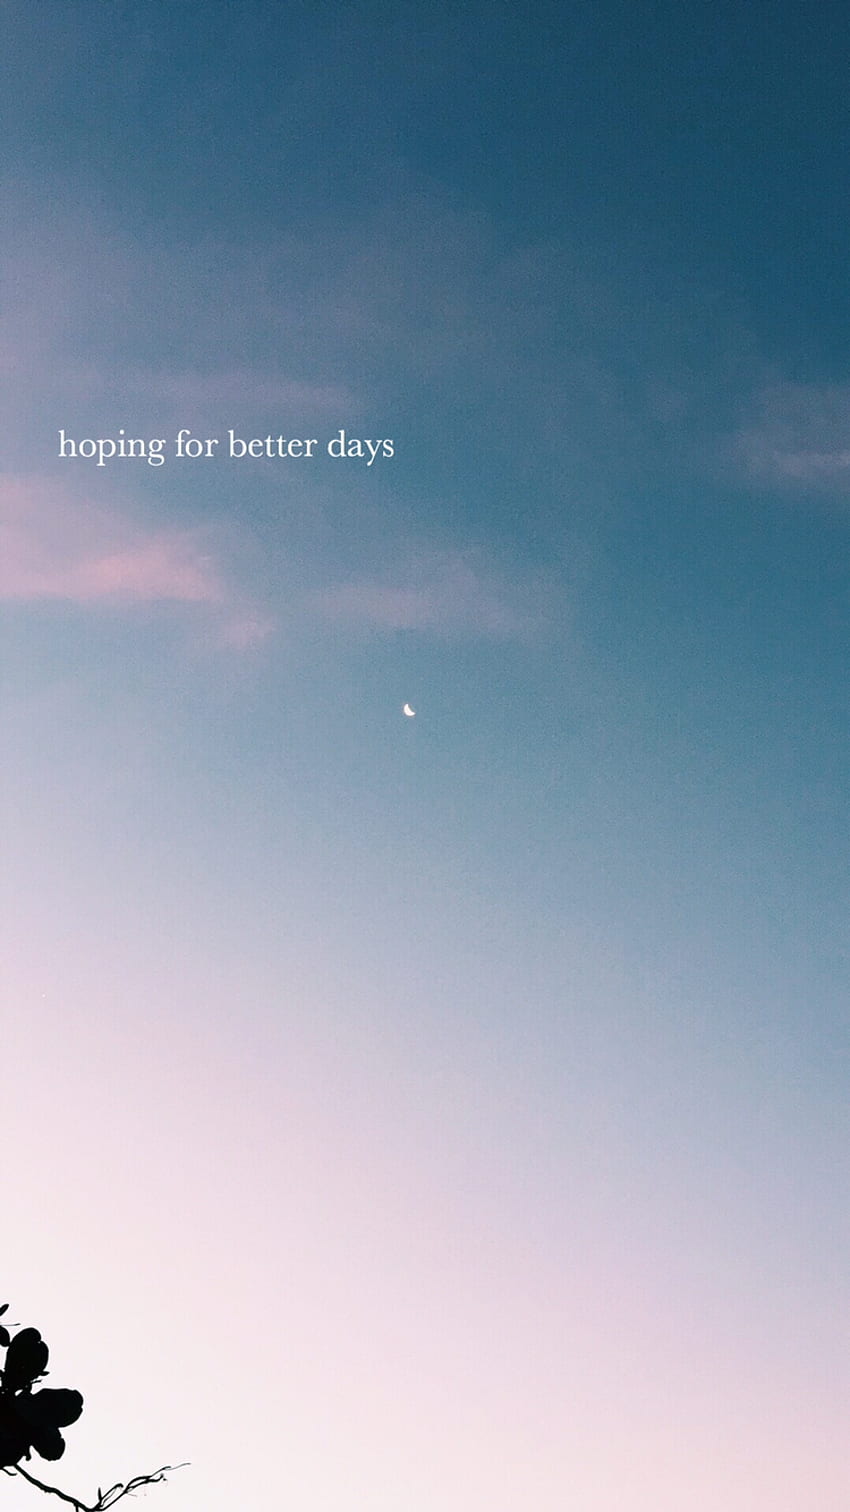 Hoping for better days. Better days quotes, Instagram quotes captions ...